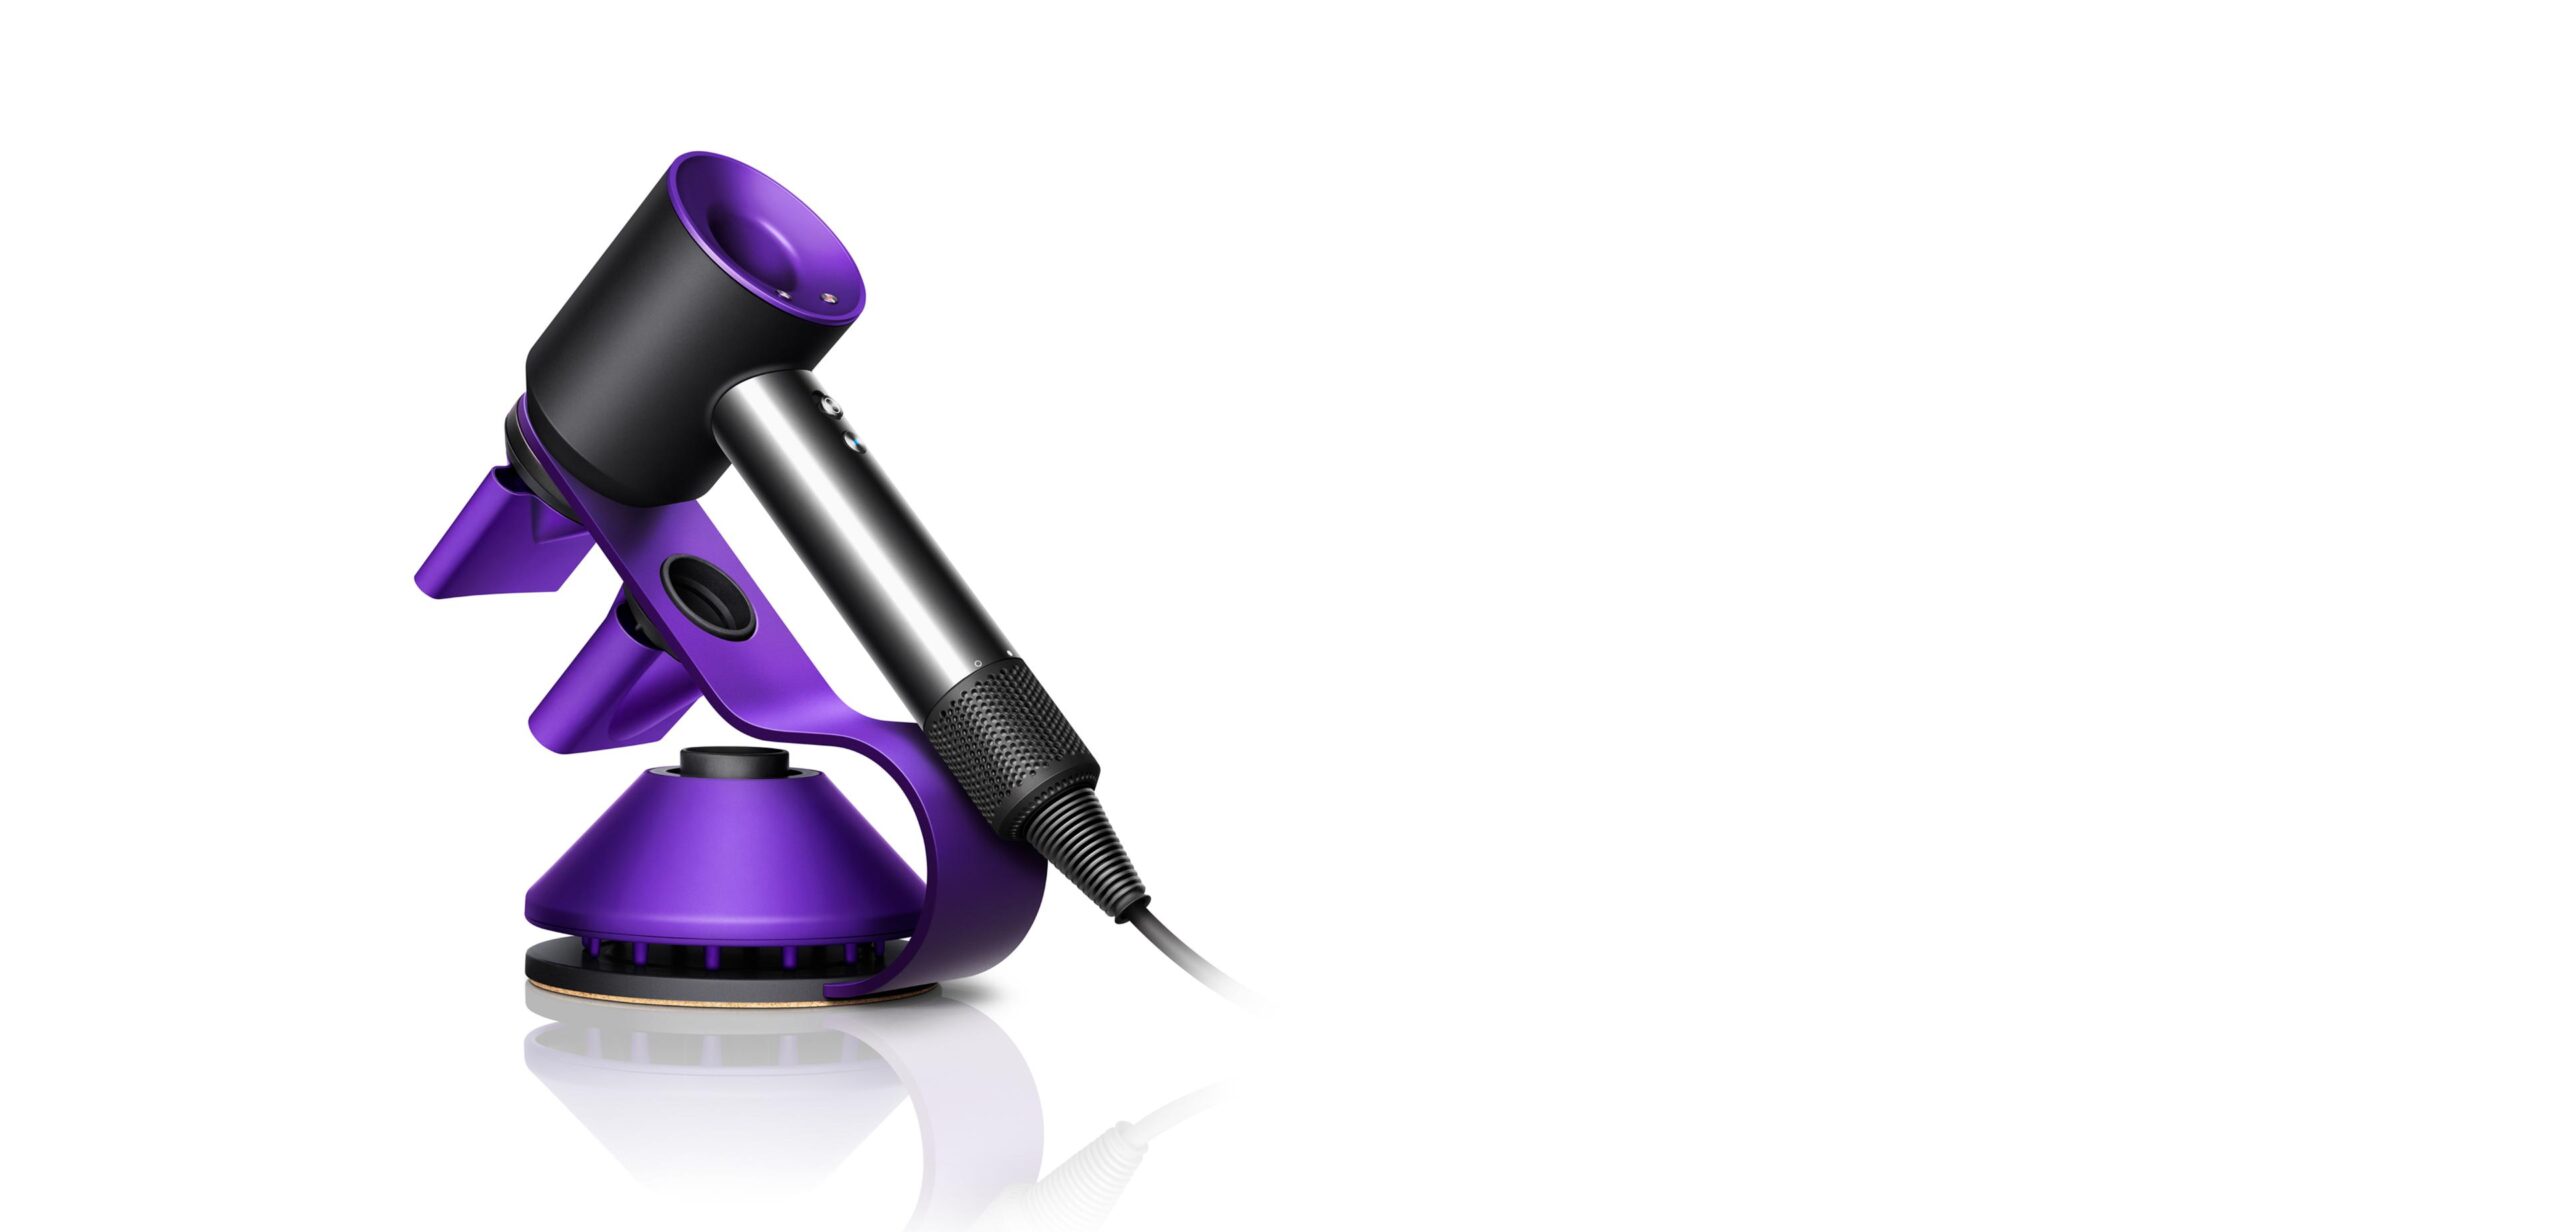 Is The Dyson Supersonic Worth It?